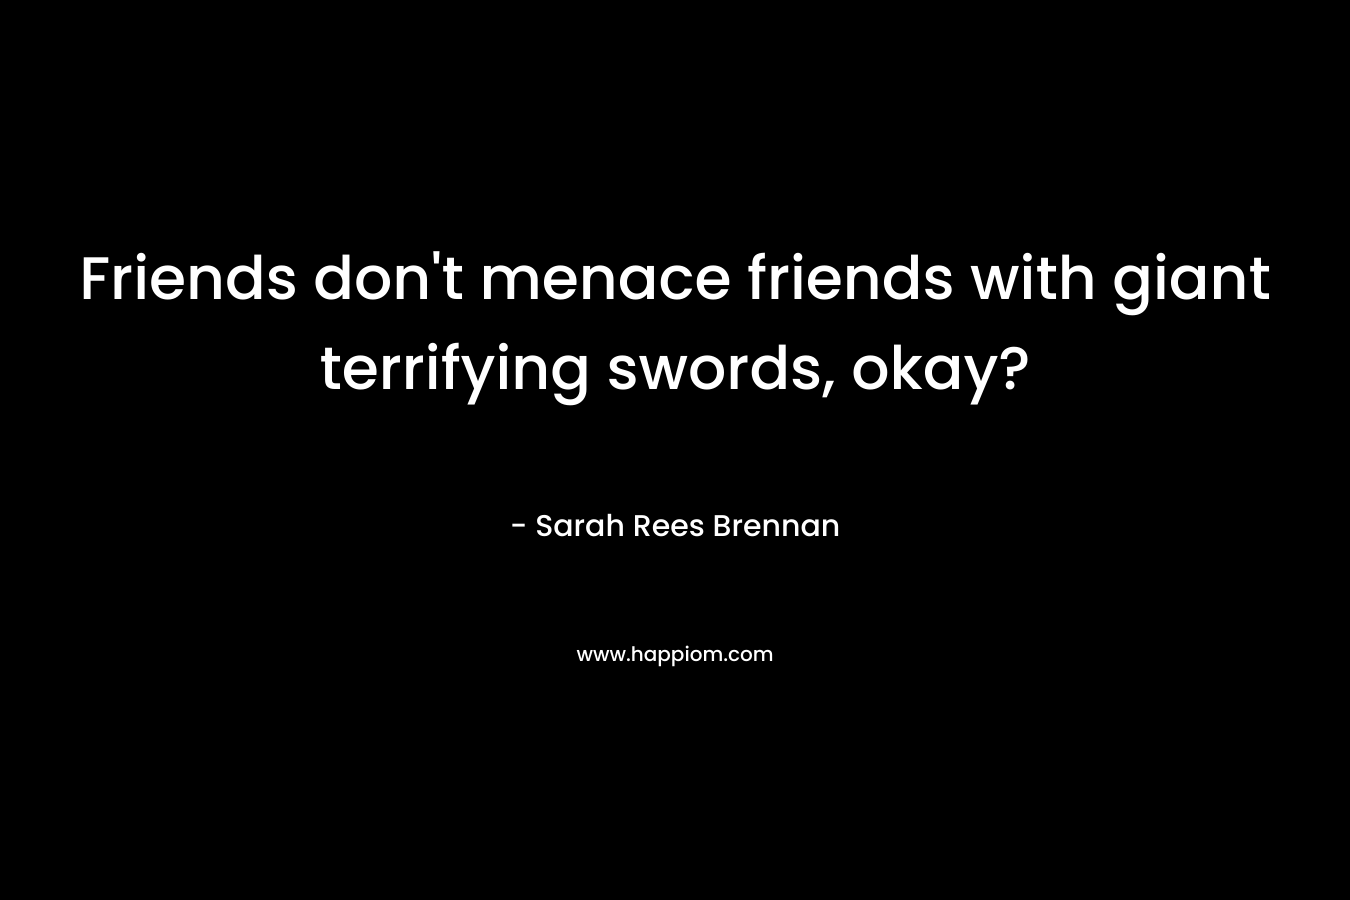 Friends don’t menace friends with giant terrifying swords, okay? – Sarah Rees Brennan